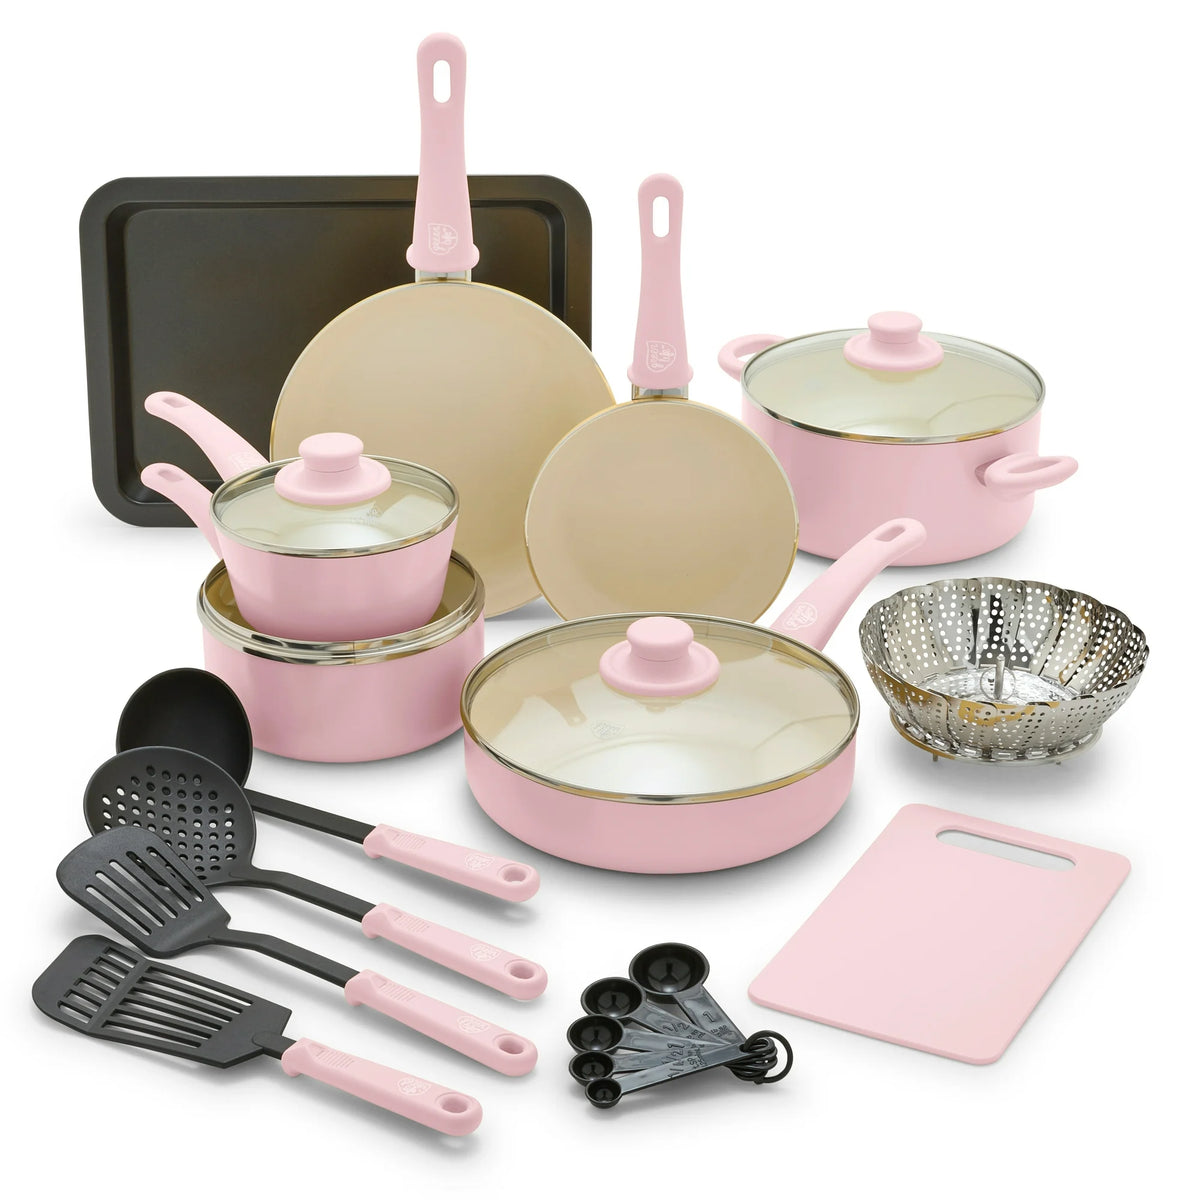 18-Piece Soft Grip Toxin-Free Healthy Ceramic Non-Stick Cookware Set, Pink,